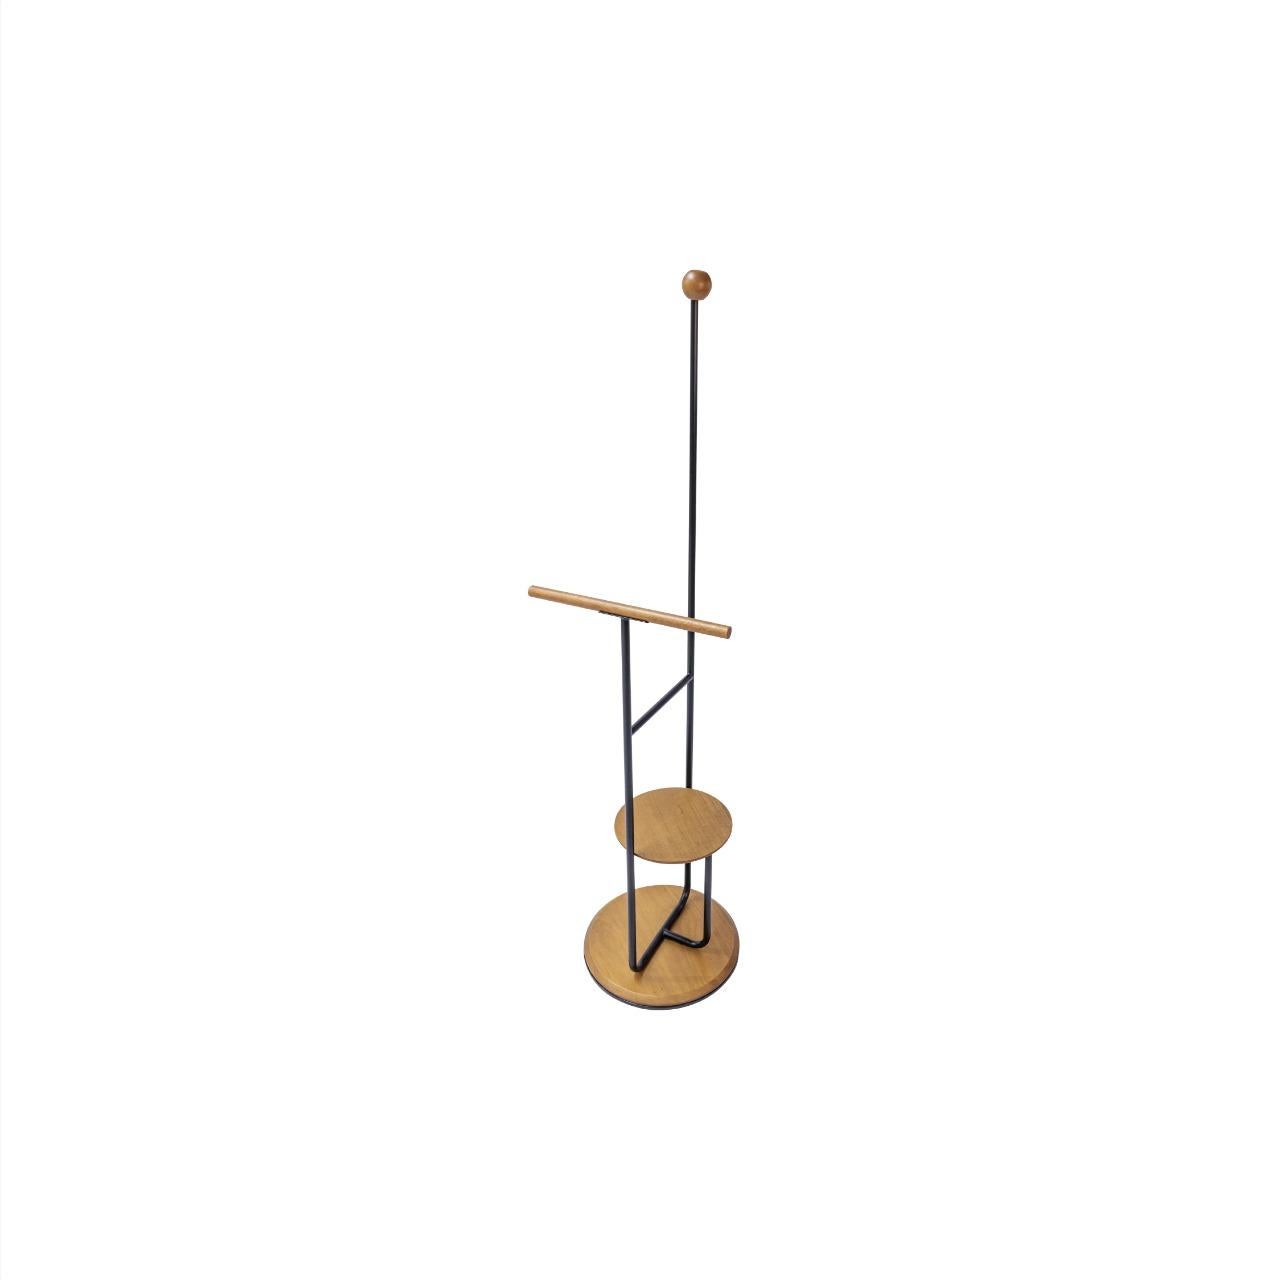 The modern Freyr coat rack is a support for our daily routines, used in the environment's entrance for hang personal objects.
The piece of extreme functionality and beauty, is produced in natural tauari wood (a Brazilian reforested wood). It has a